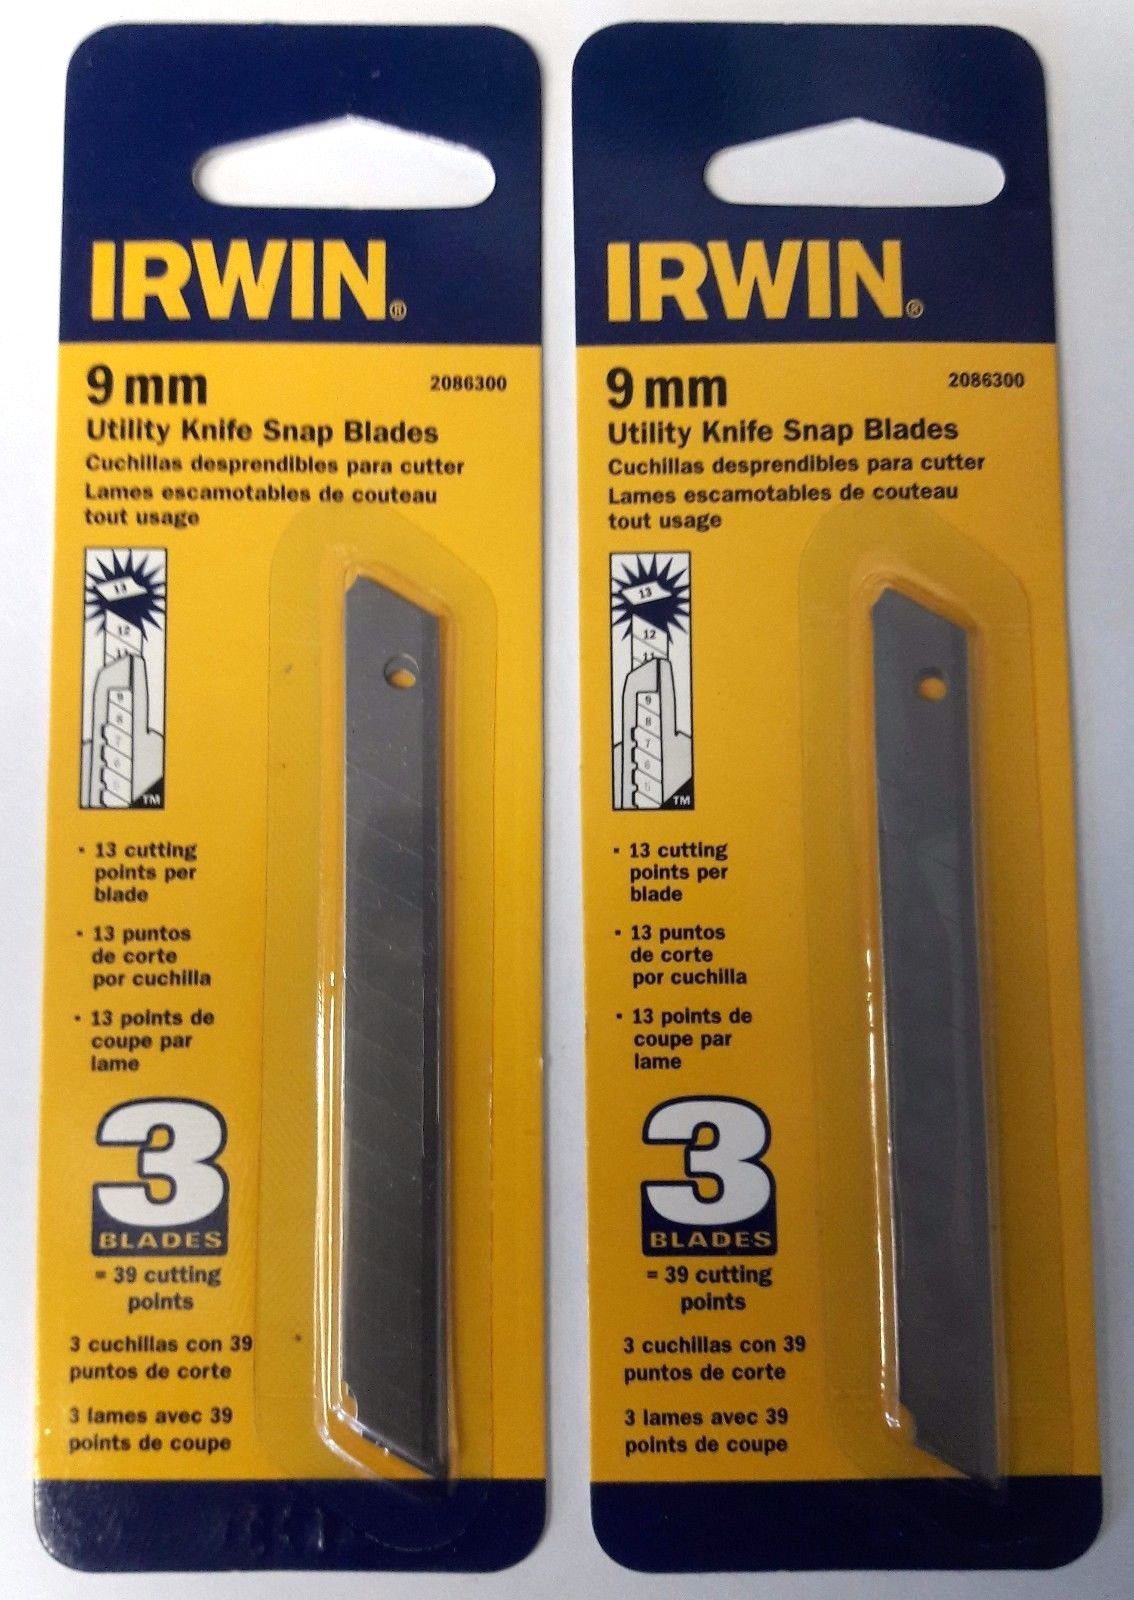 IRWIN 2086300 Utility Knife Blade Snap Off 9mm 2-3 Packs